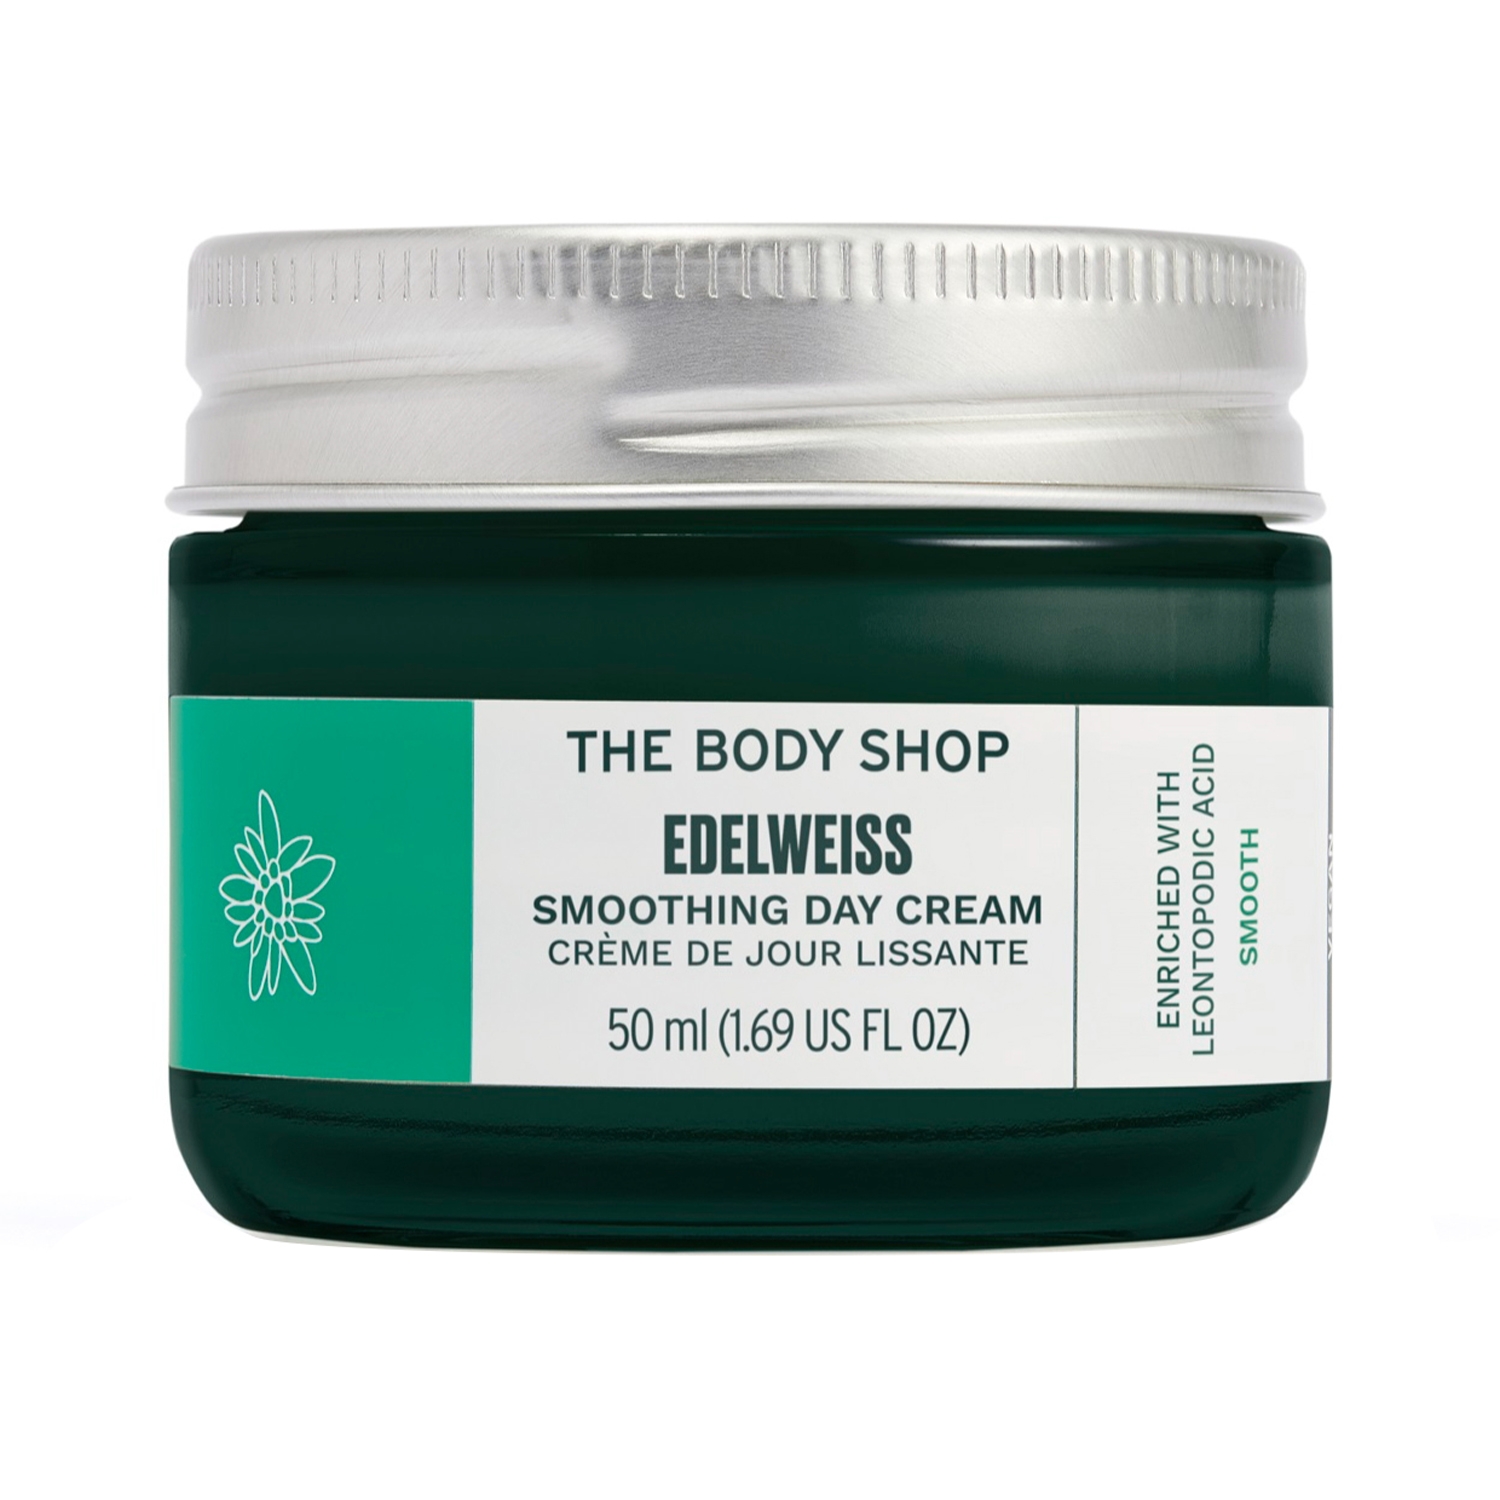 The Body Shop | The Body Shop Edelweiss Smoothing Day Cream (50ml)